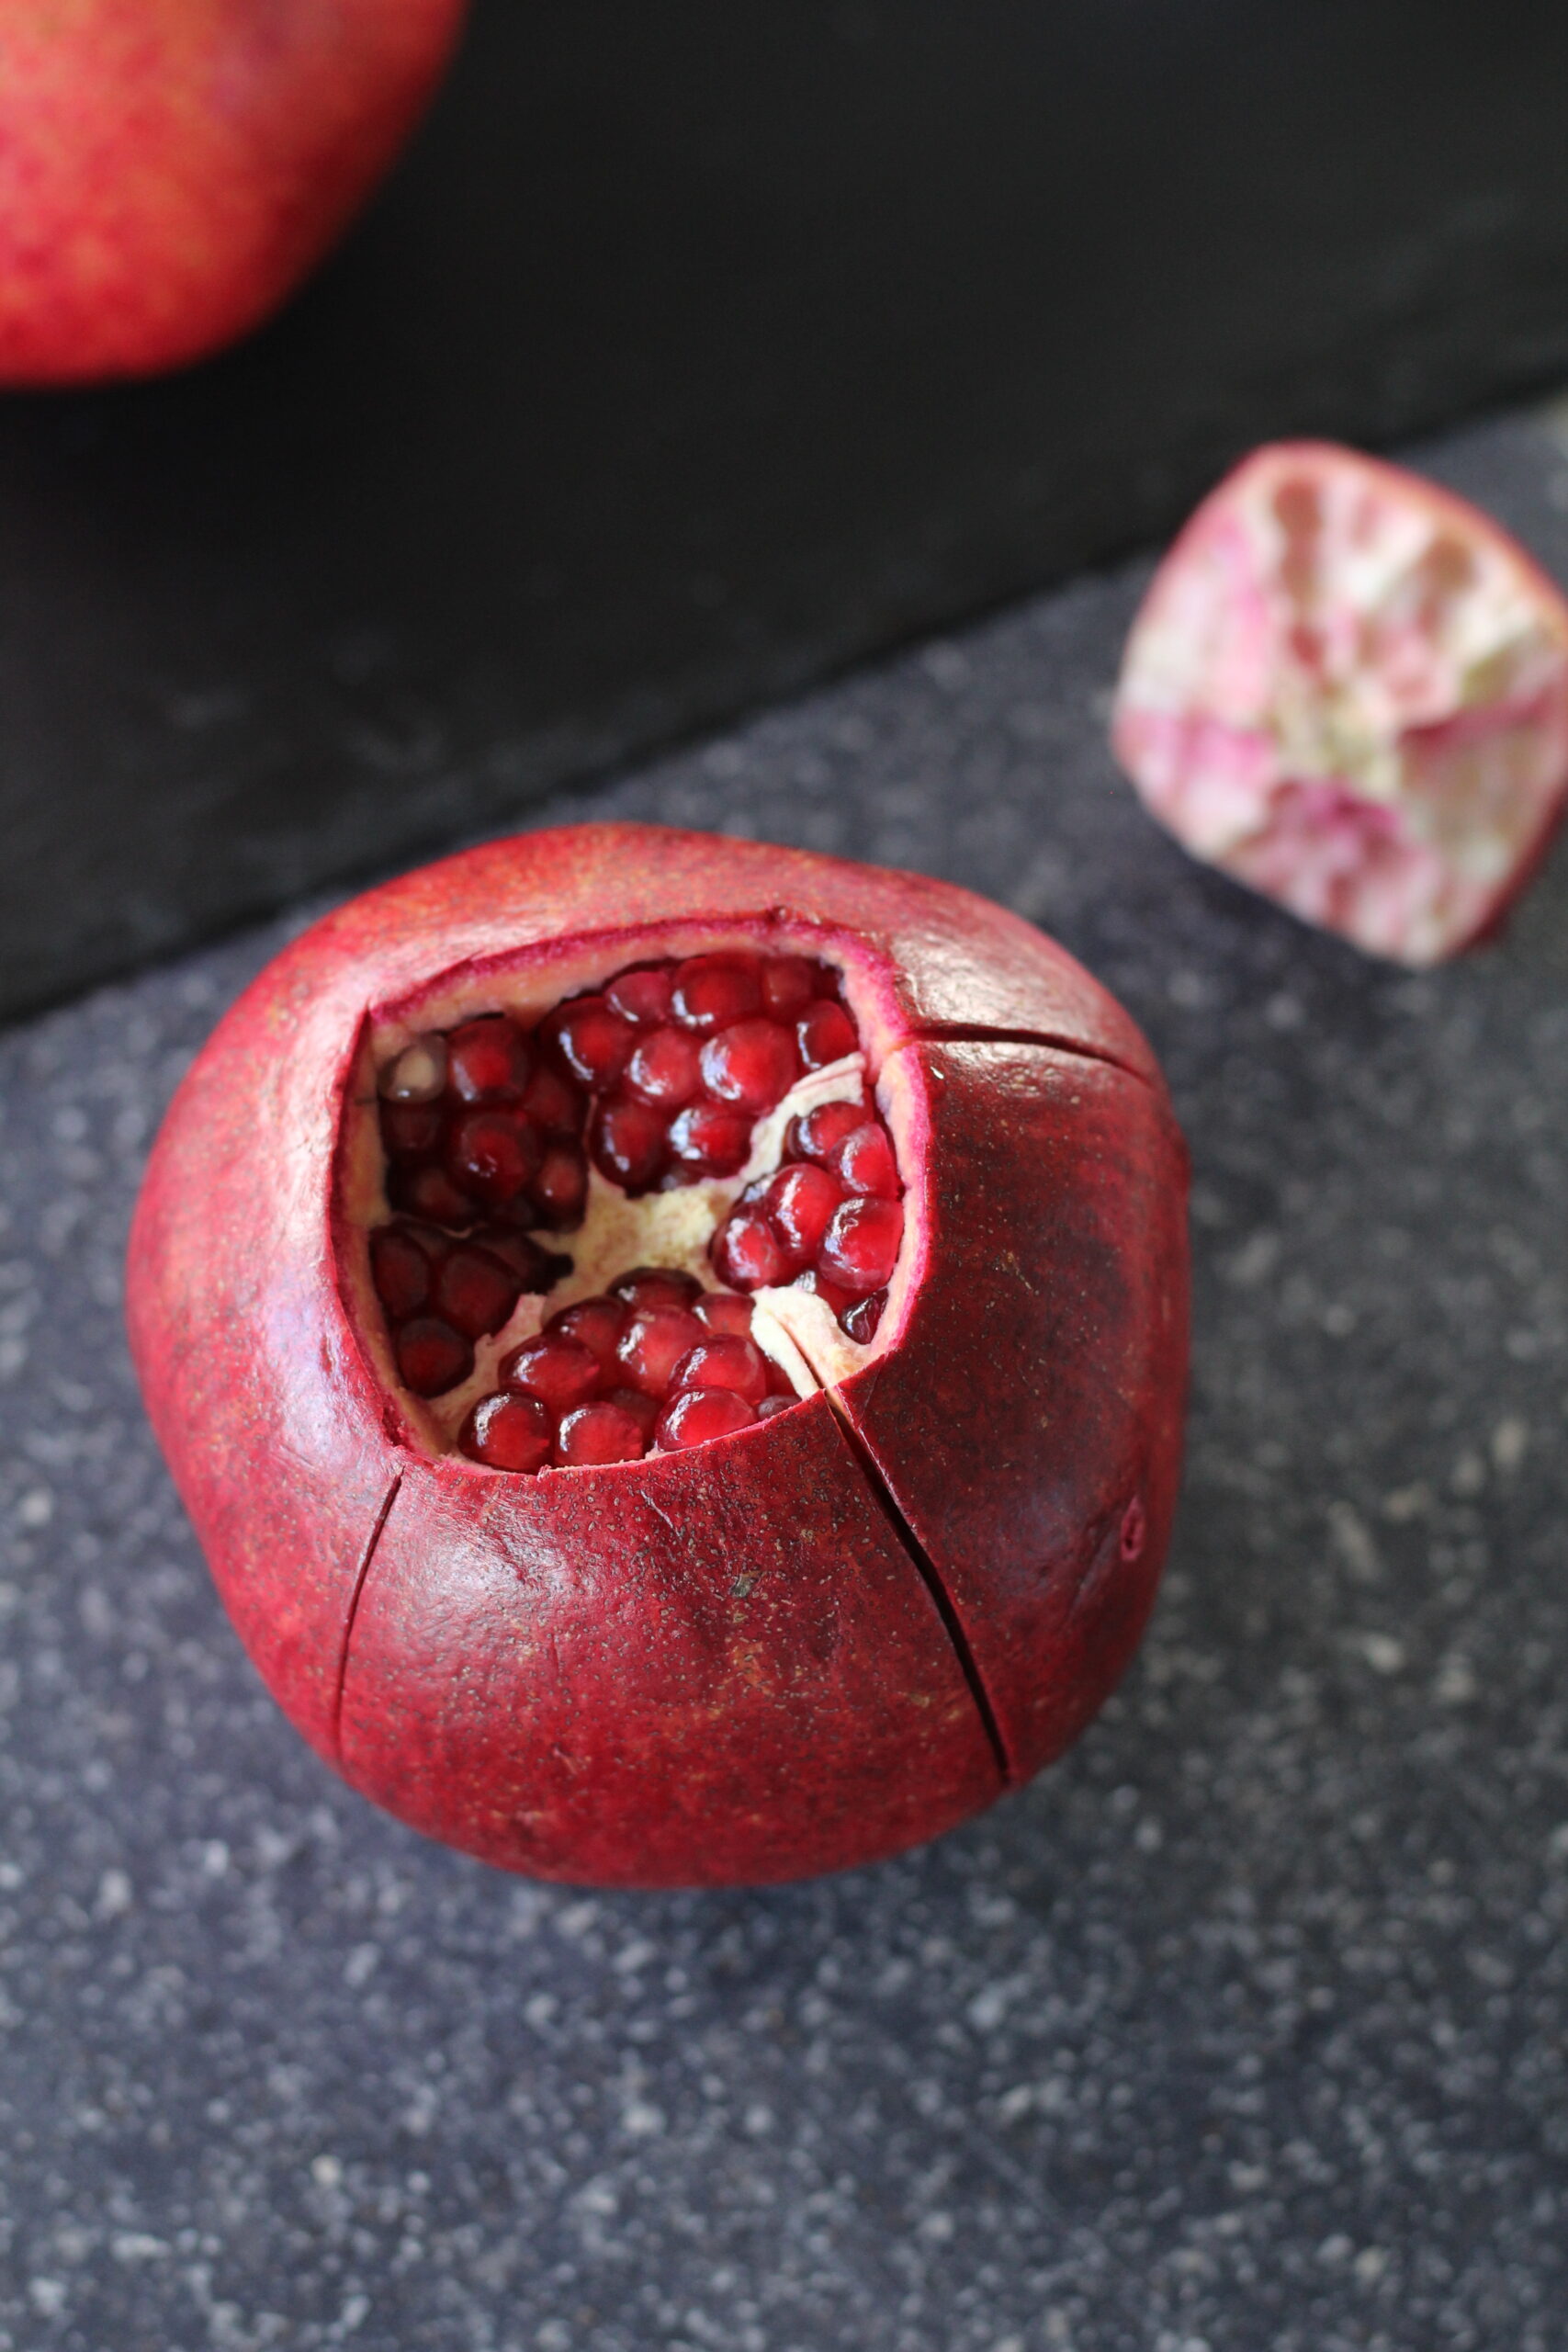 Cut the Crown off the Pomegranate